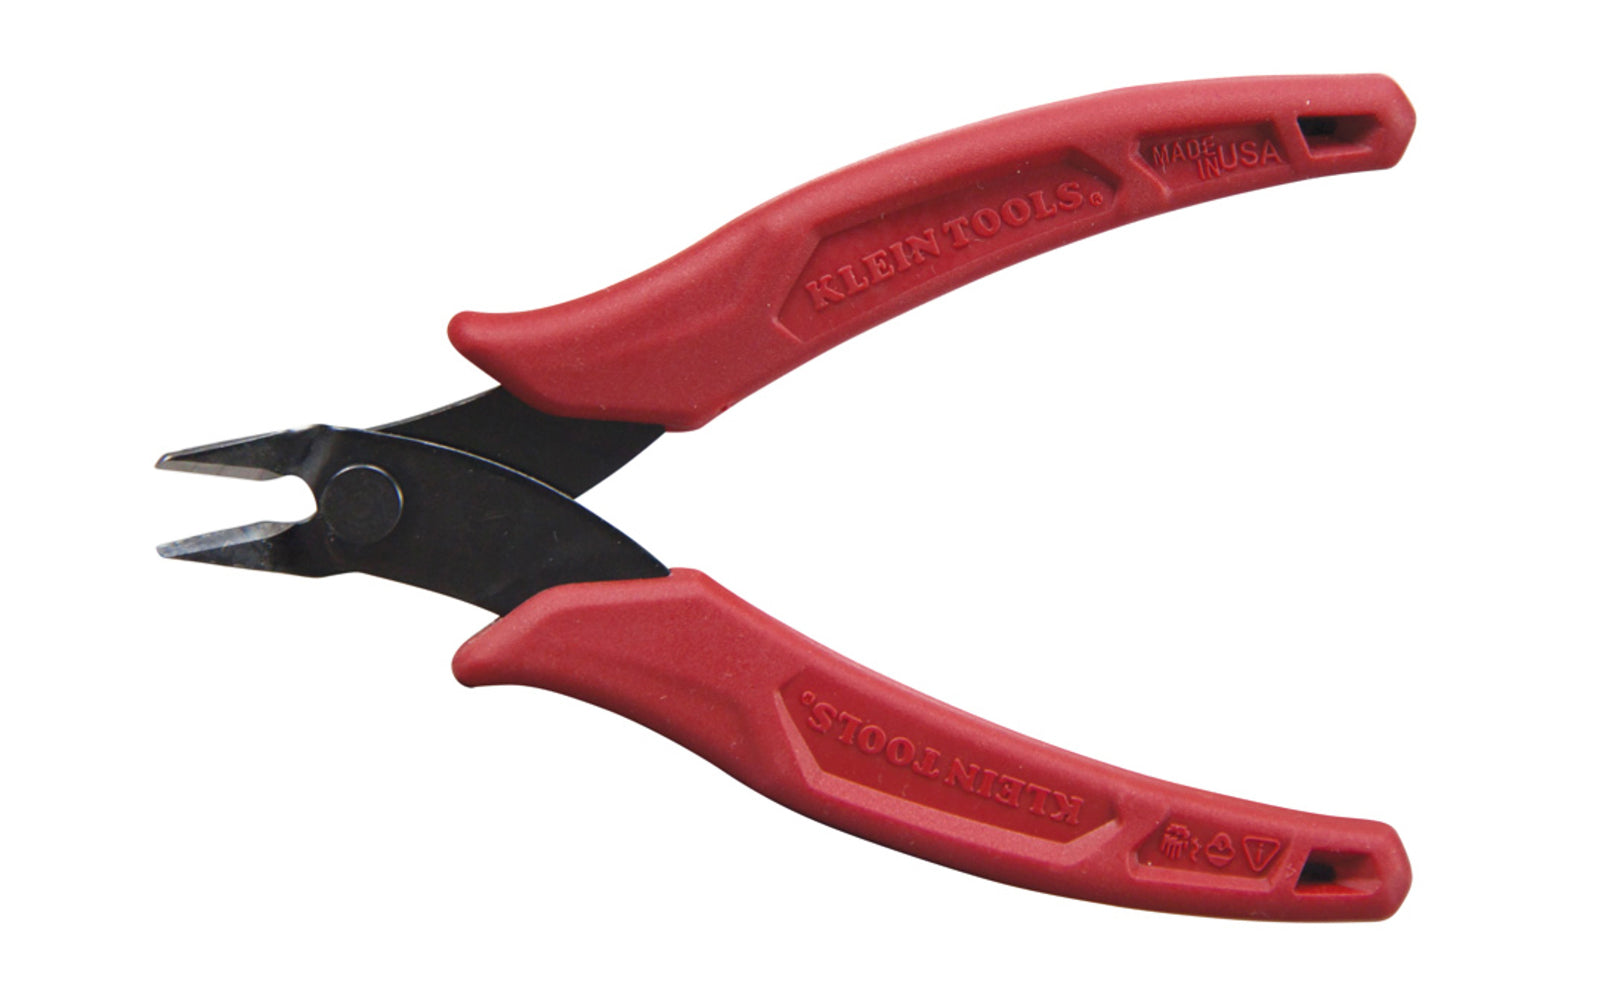 Klein Tools Precision Flush Cutter offers added comfort for cutting applications that demand precision and control. Improved knife design on these pliers snips soft wire up to 16 AWG for a flat, flush cut. Great for cutting small wire, zip ties and other fine material. Model D275-5. 